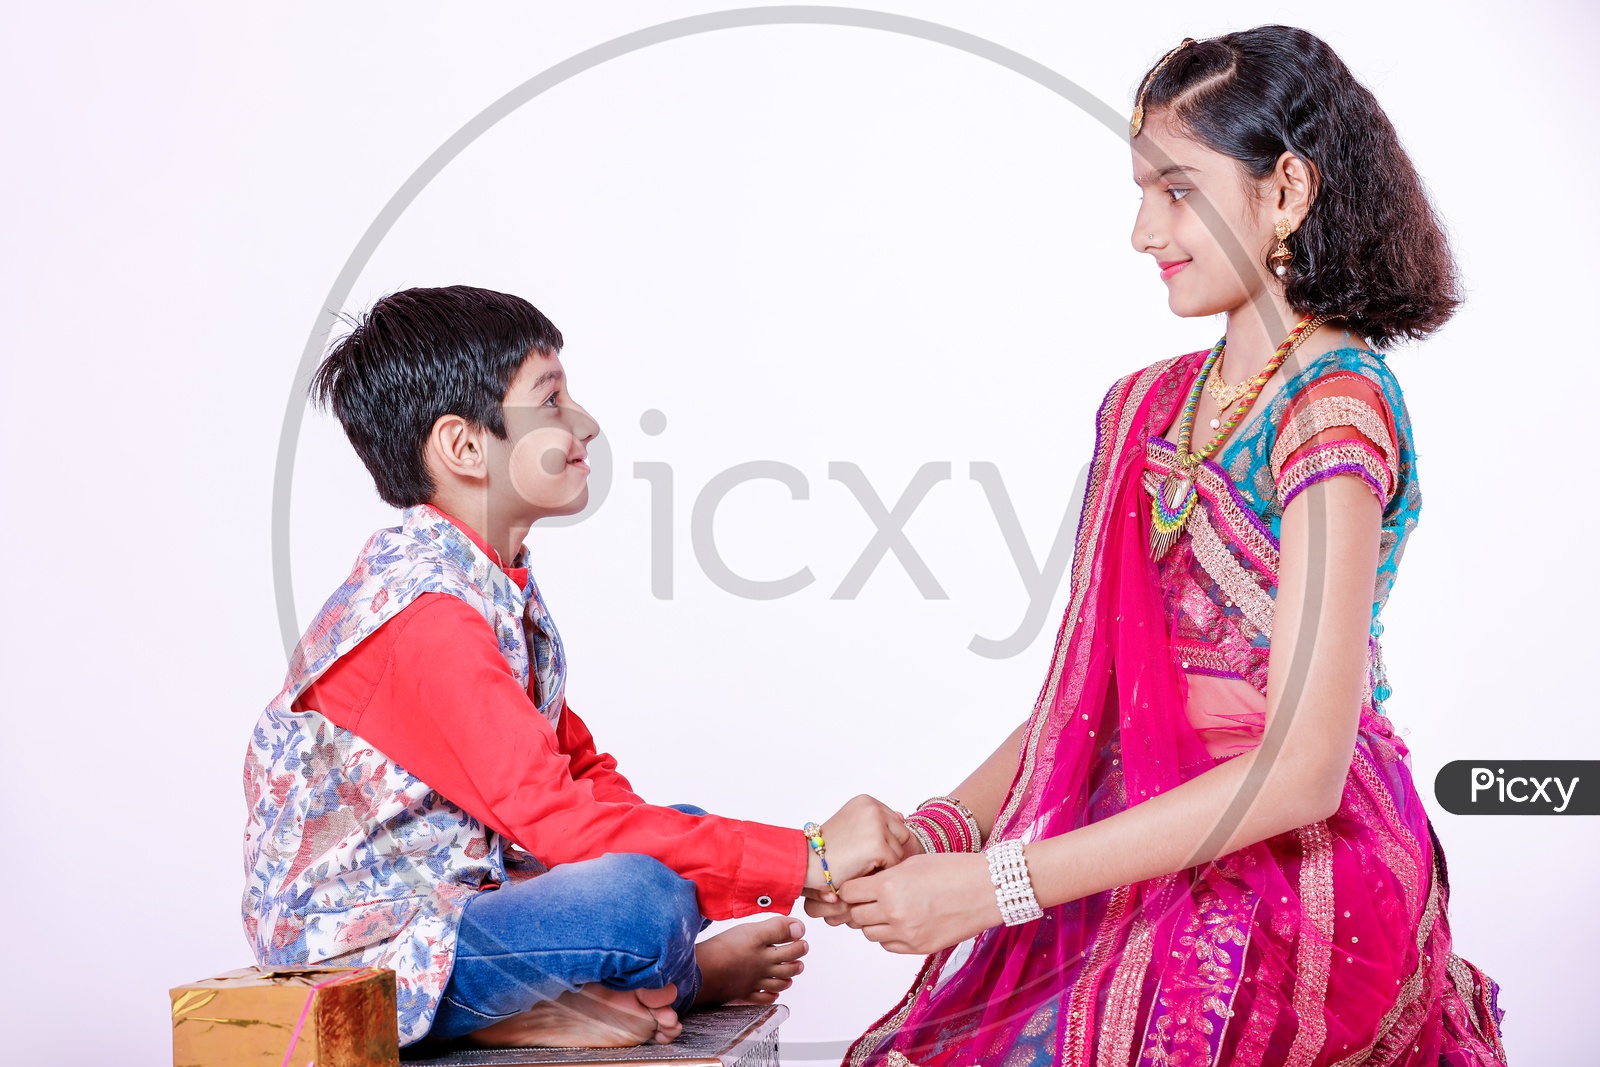 Photograph of cute little brother and sister celebrating Rakhi Festival with white background